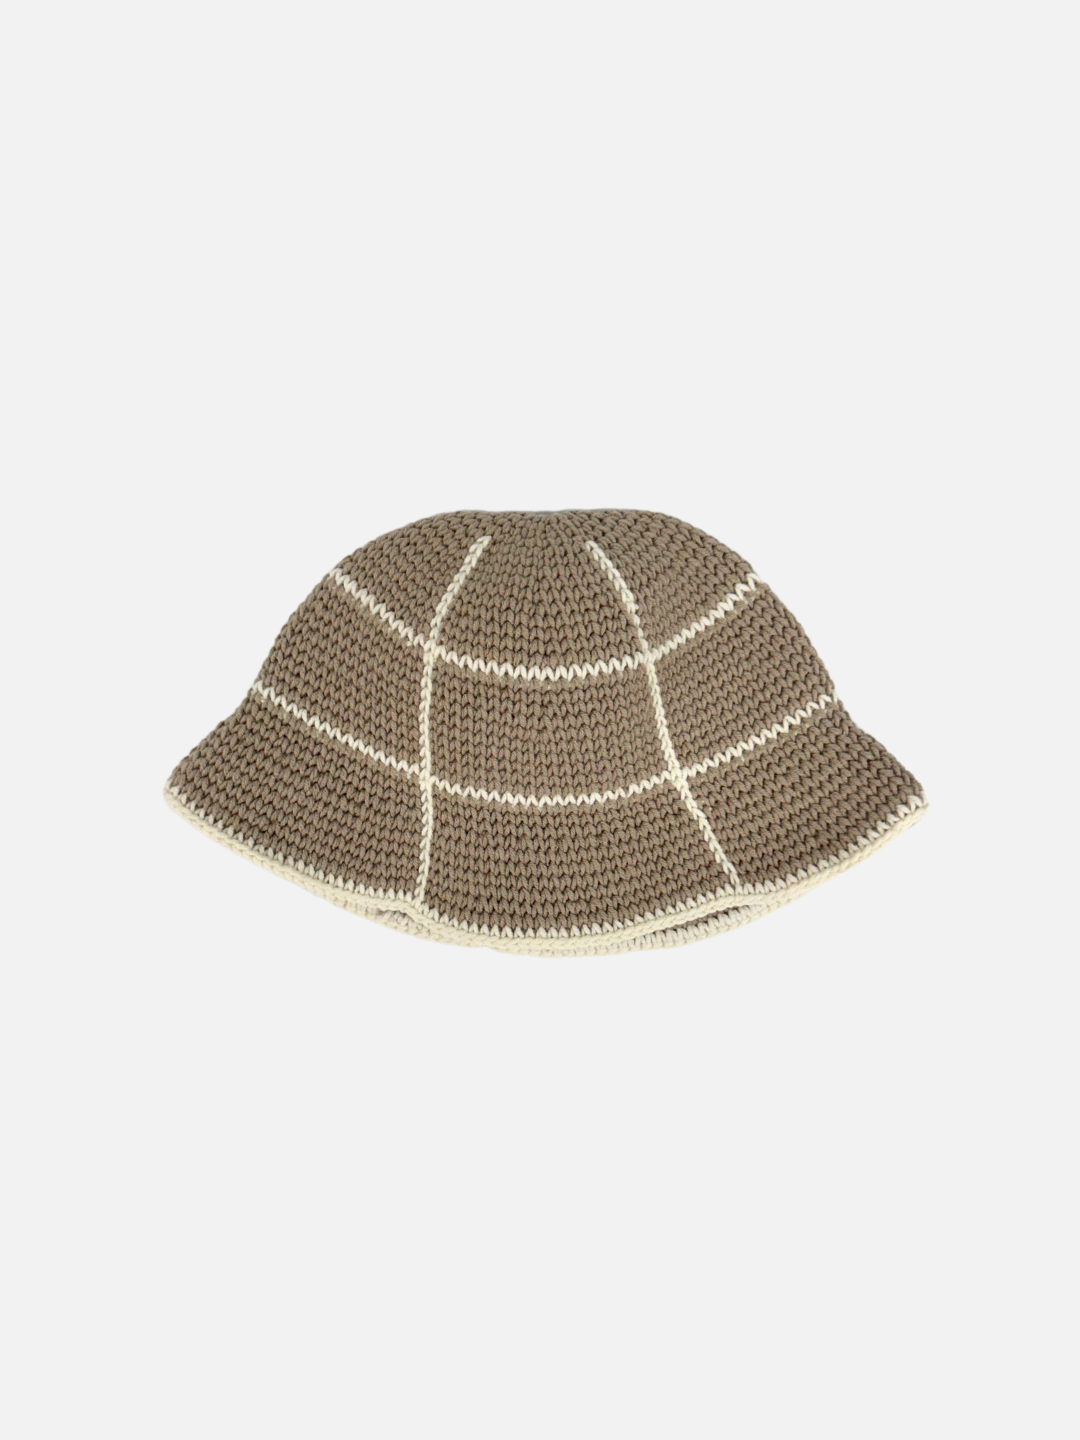 The HAND-CROCHETED GRID HAT - 3-6Y is a charming, hand-knitted brown bucket hat made from cotton yarn. It features a white grid design and is complemented by a matching white brim. This relaxed, slouchy accessory is beautifully displayed against a plain white background.